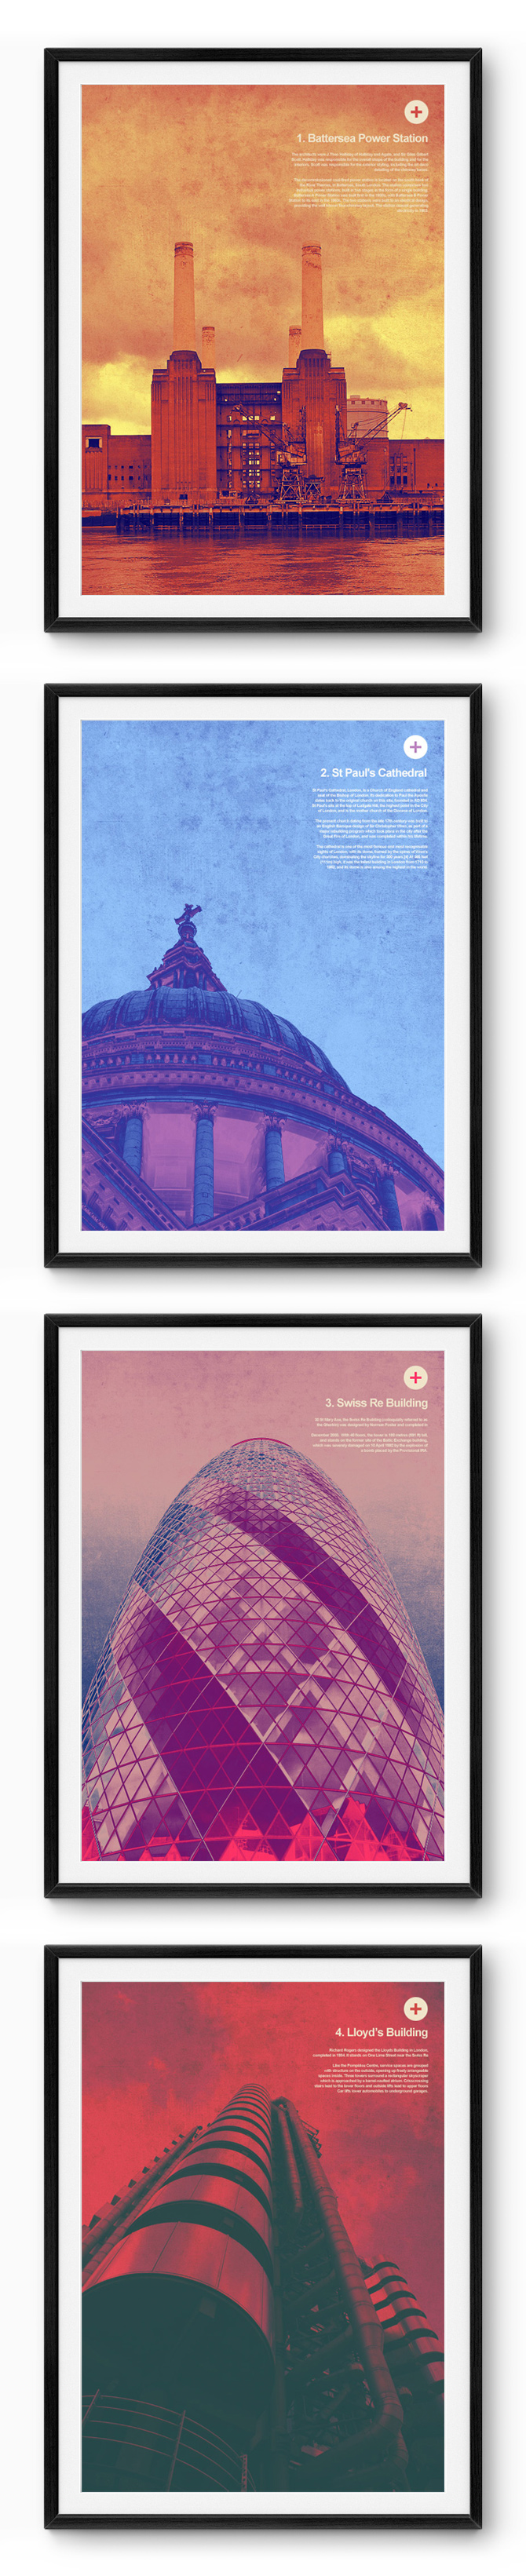 architecture posters